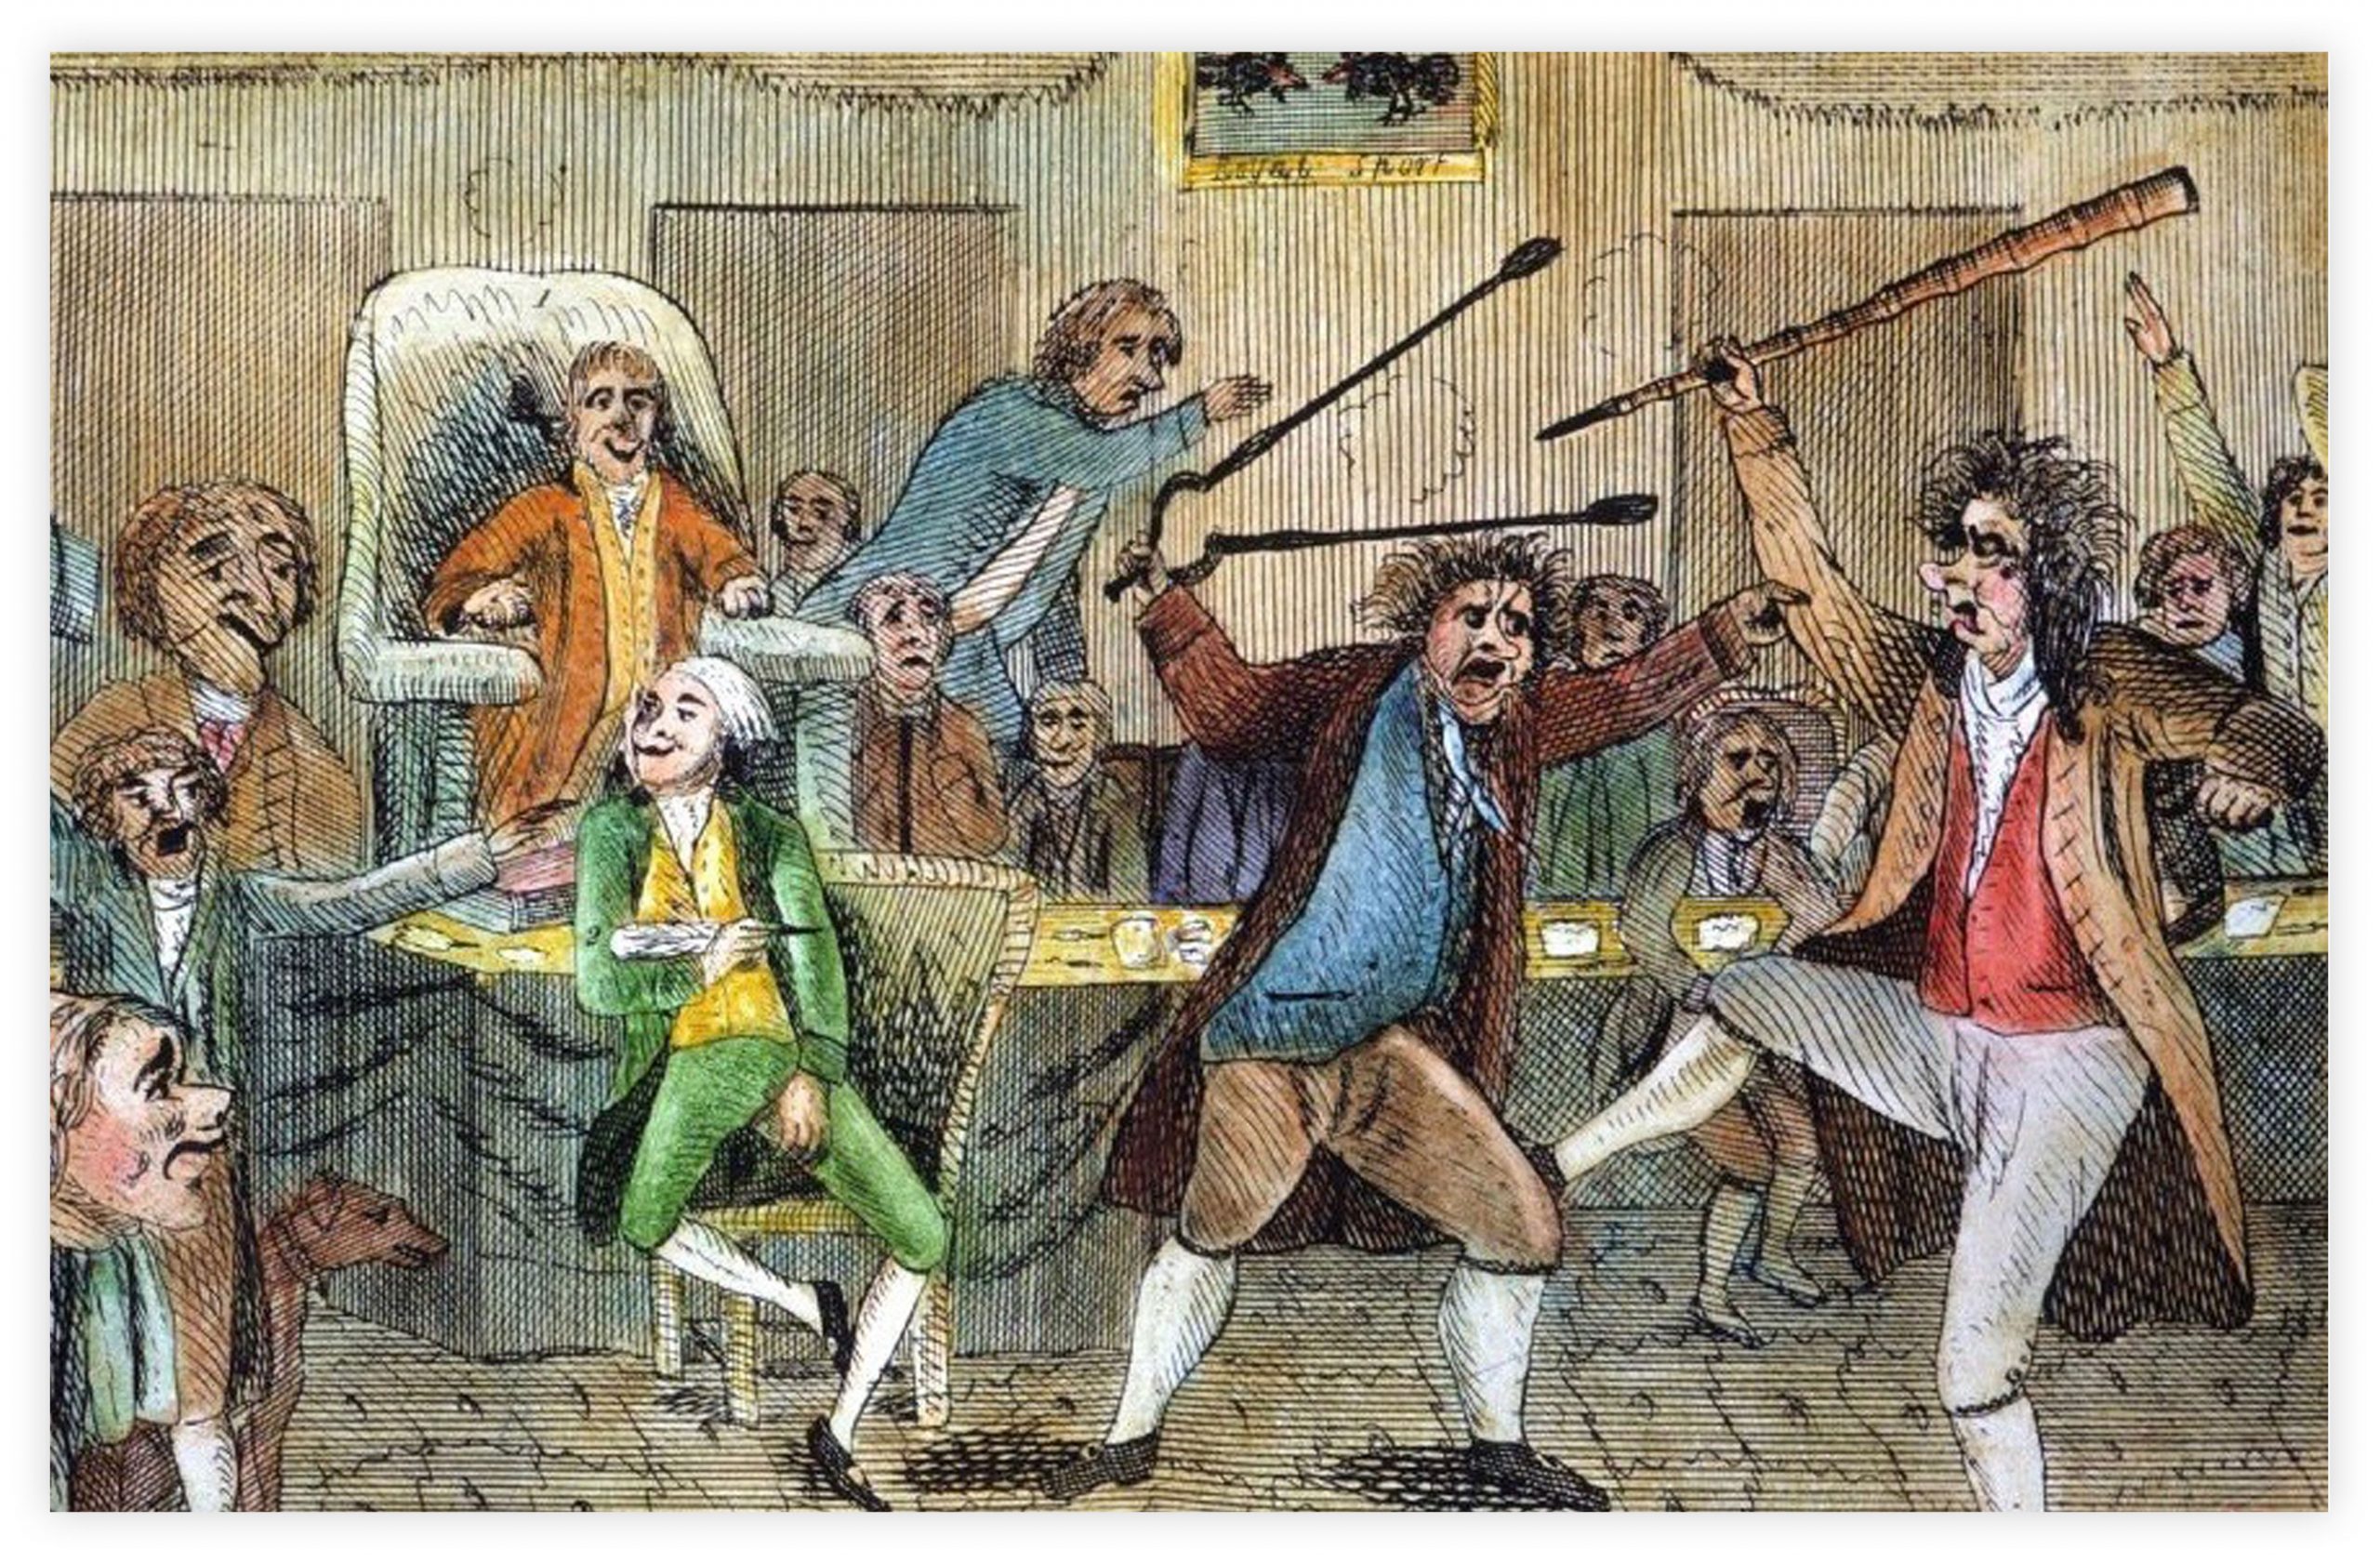 Congressional Pugilists (1798) Philadelphia, PA (Library of Congress). In 1798, after a bitter personal exchange on the floor of the US House of Representatives, Federalist Roger Griswold of Connecticut grabbed a cane and attacked Democratic-Republican Matthew Lyon of Vermont. Lyon grabbed a nearby pair of fireplace tongs and lashed out against his adversary. This image reflects the heightened nature of political antagonisms that erupted in the 1790s with the emergence of the country’s first political parties.